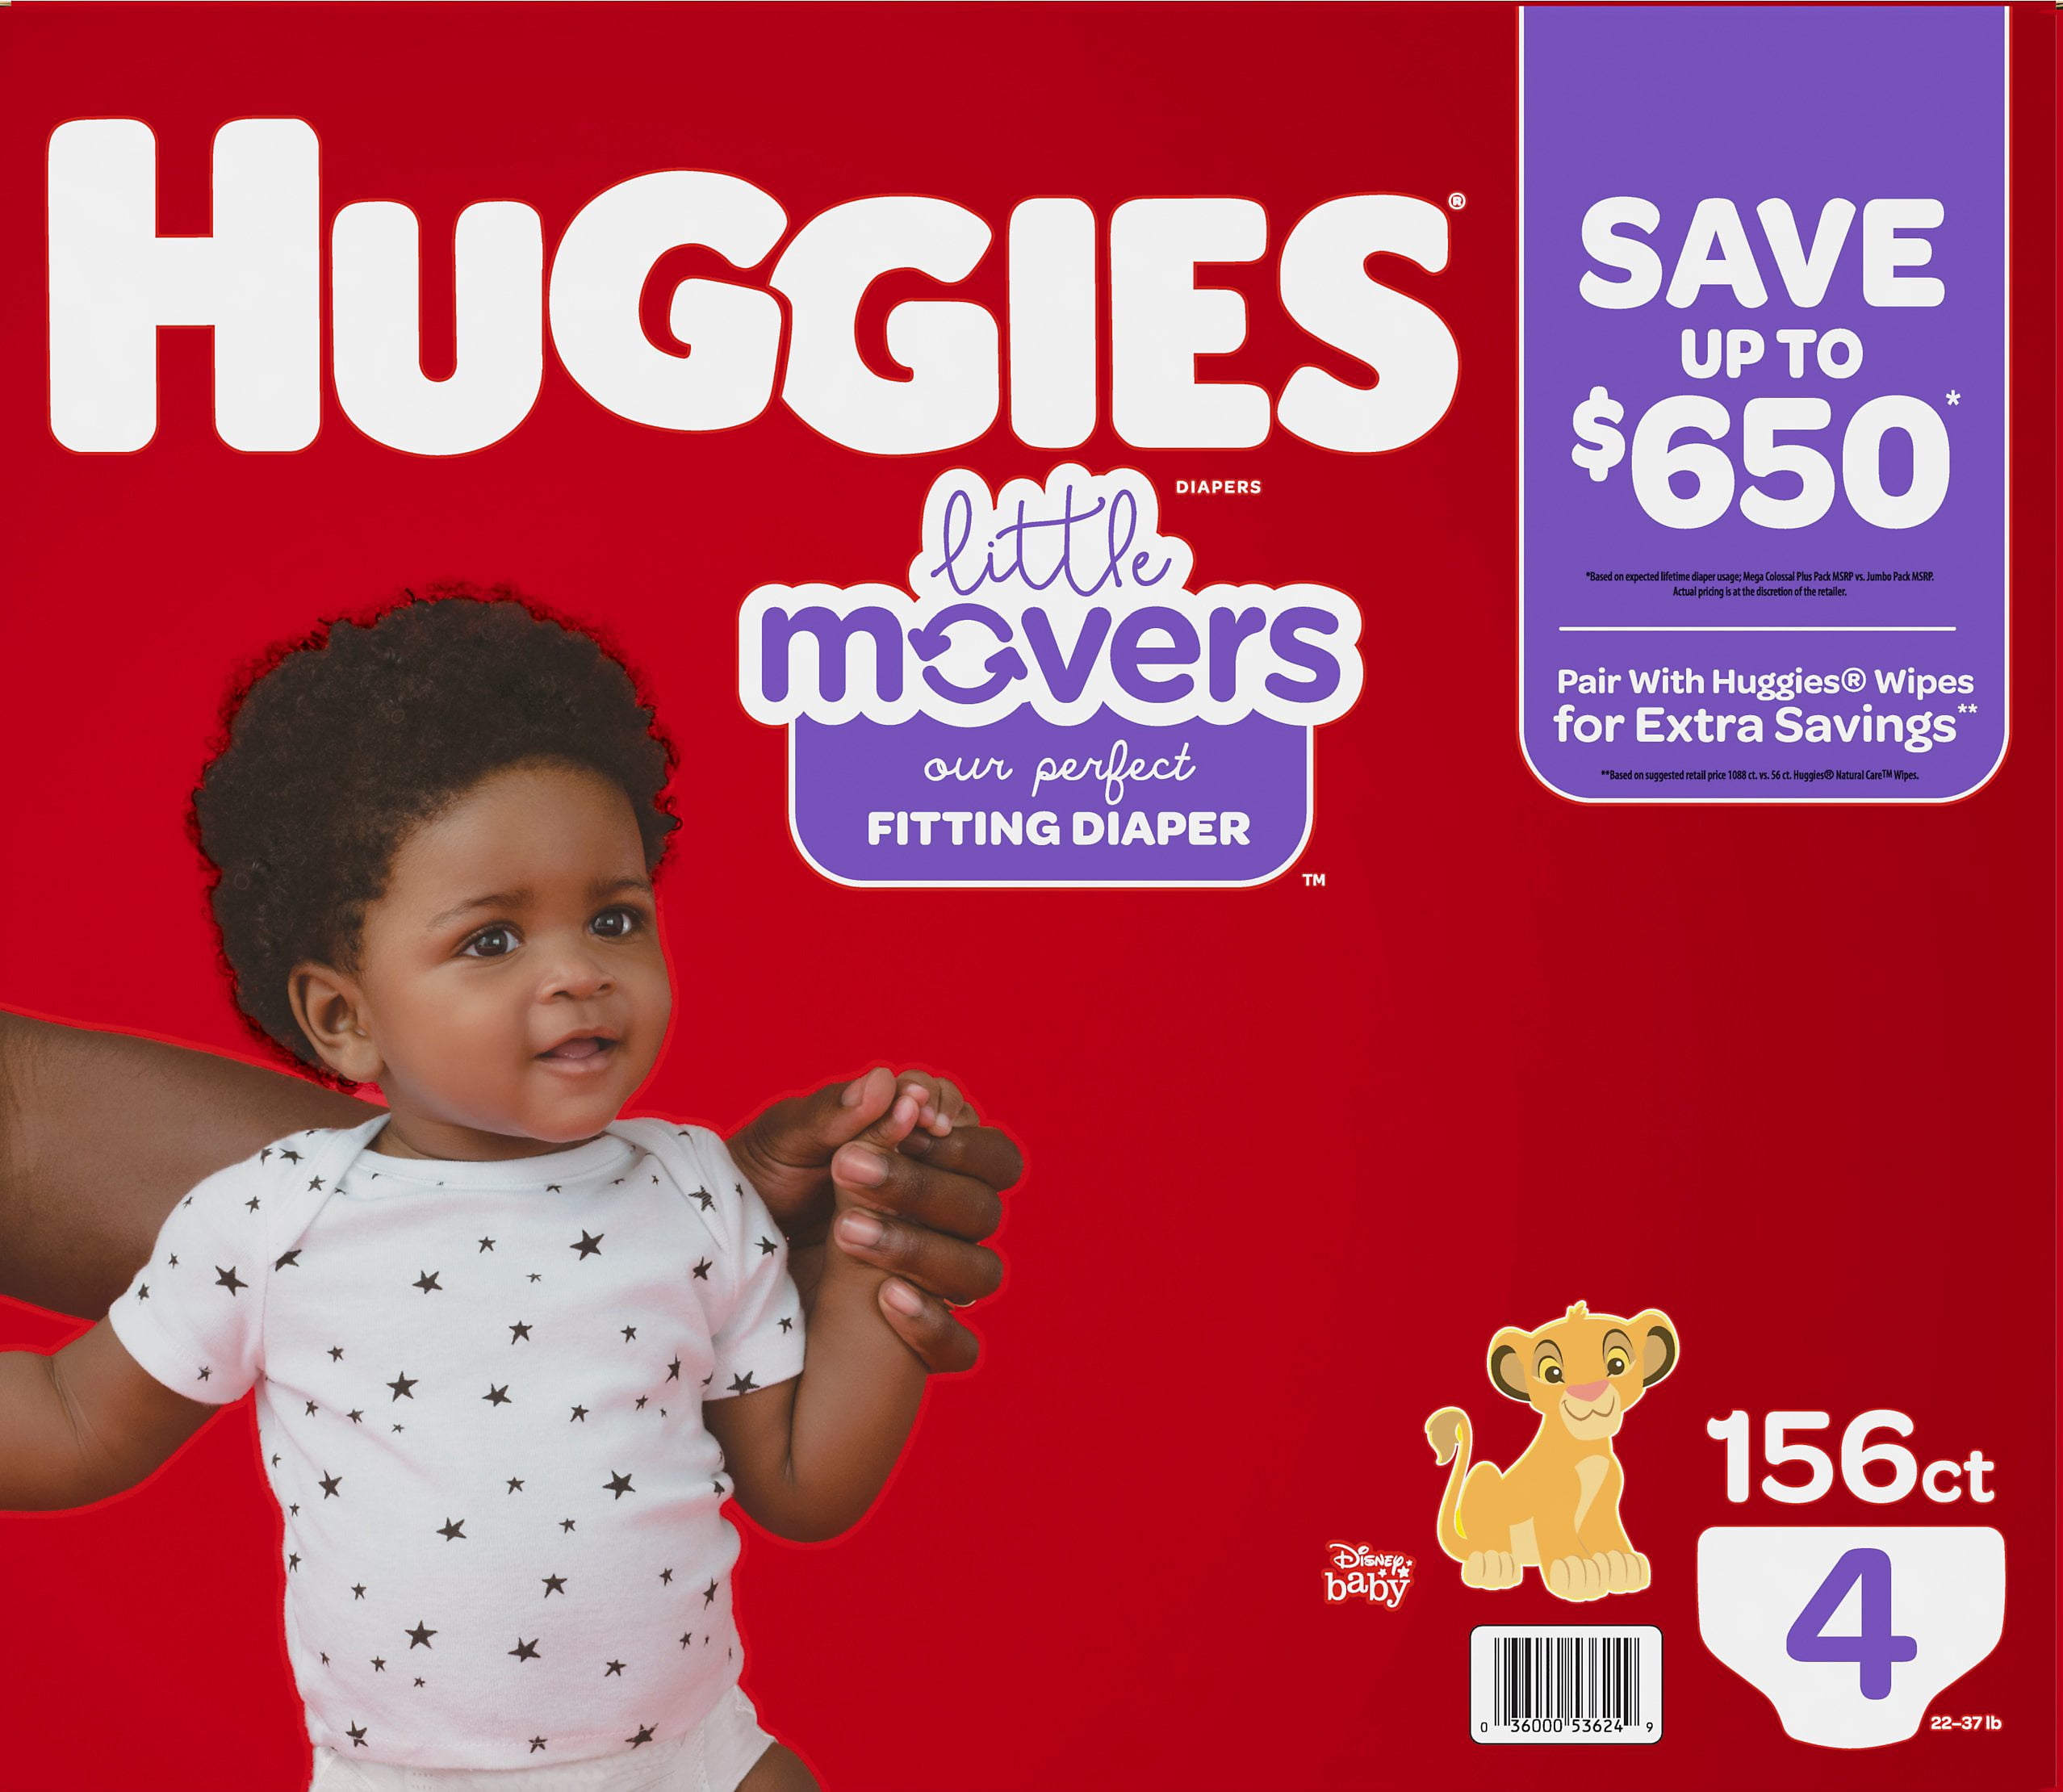 Huggies Pull-Ups Plus Boy or Girls Box Case 124 or 116 or 102 CT PICK SIZE 